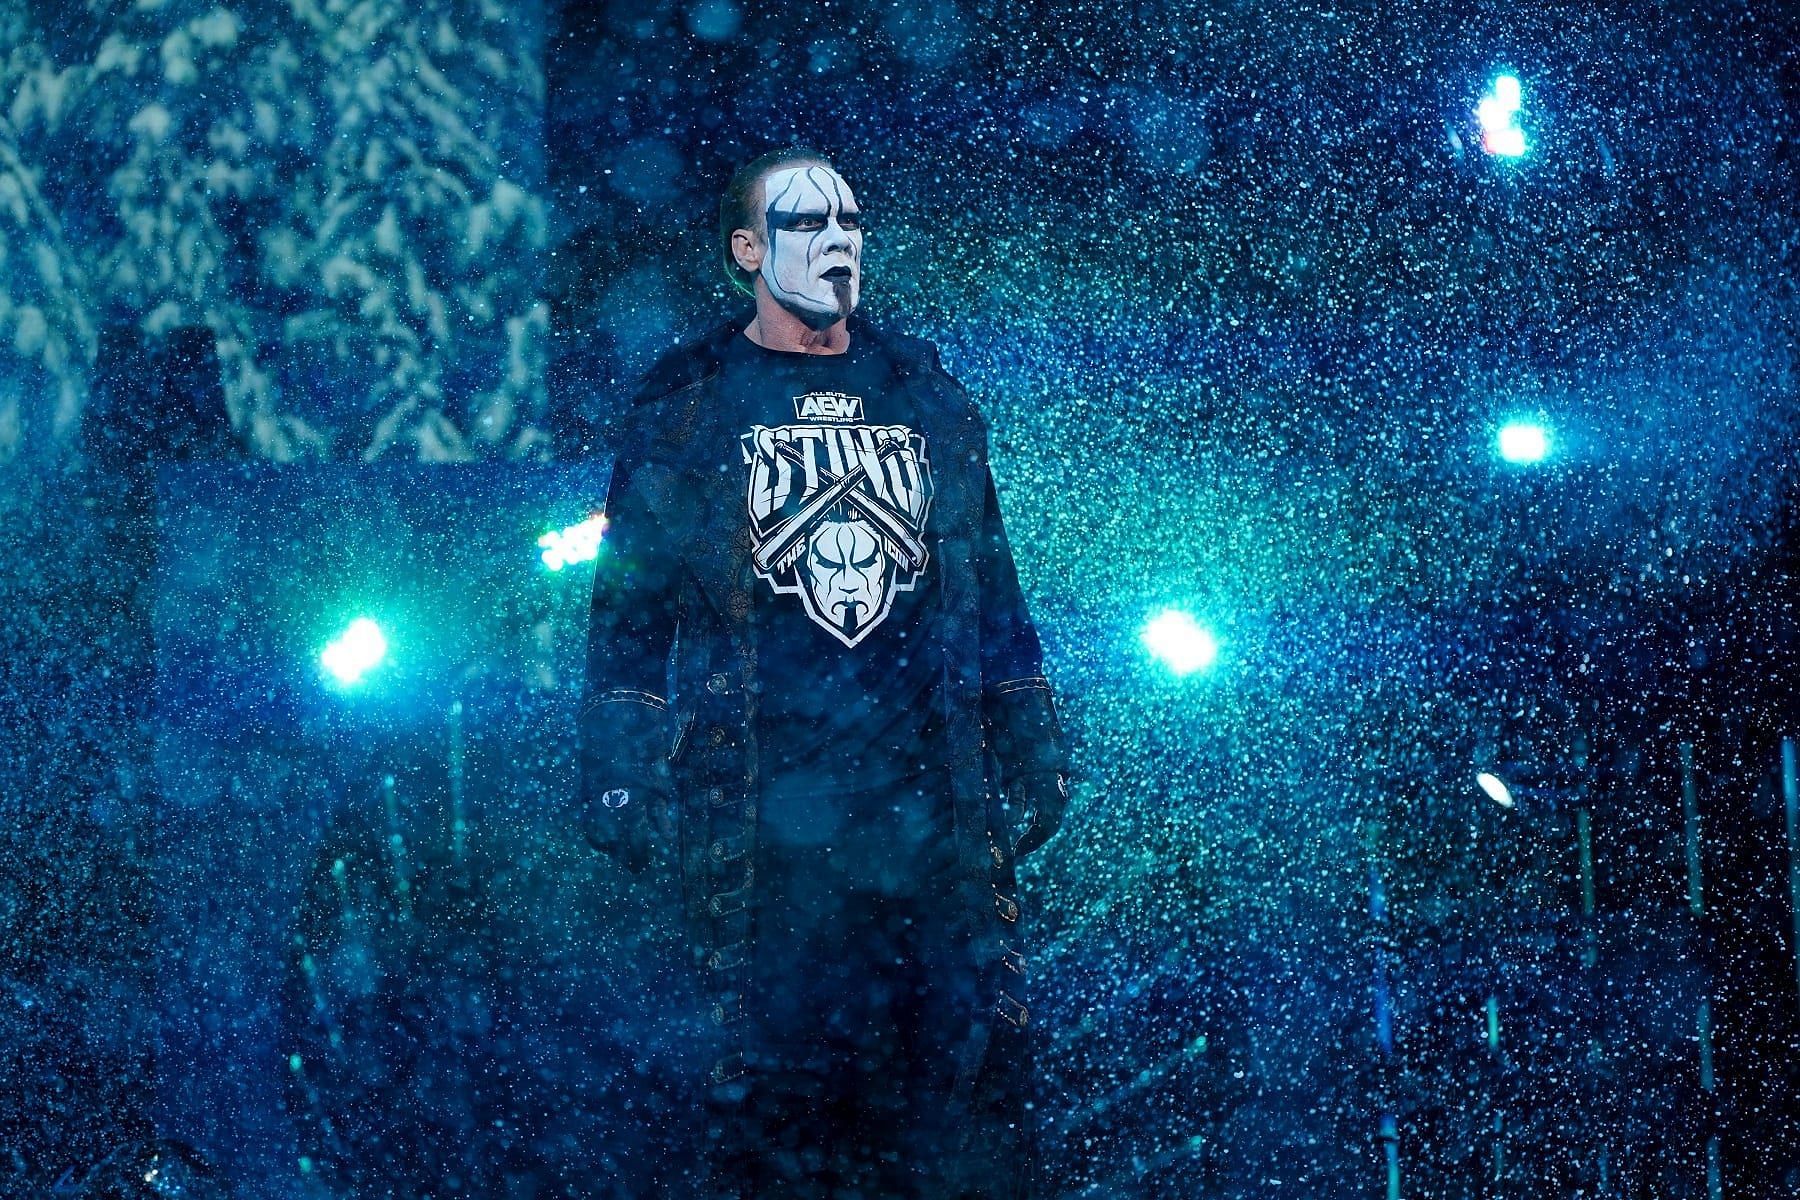 Sting took to Twitter to promote his next match as well as look back on one of his greatest matches.